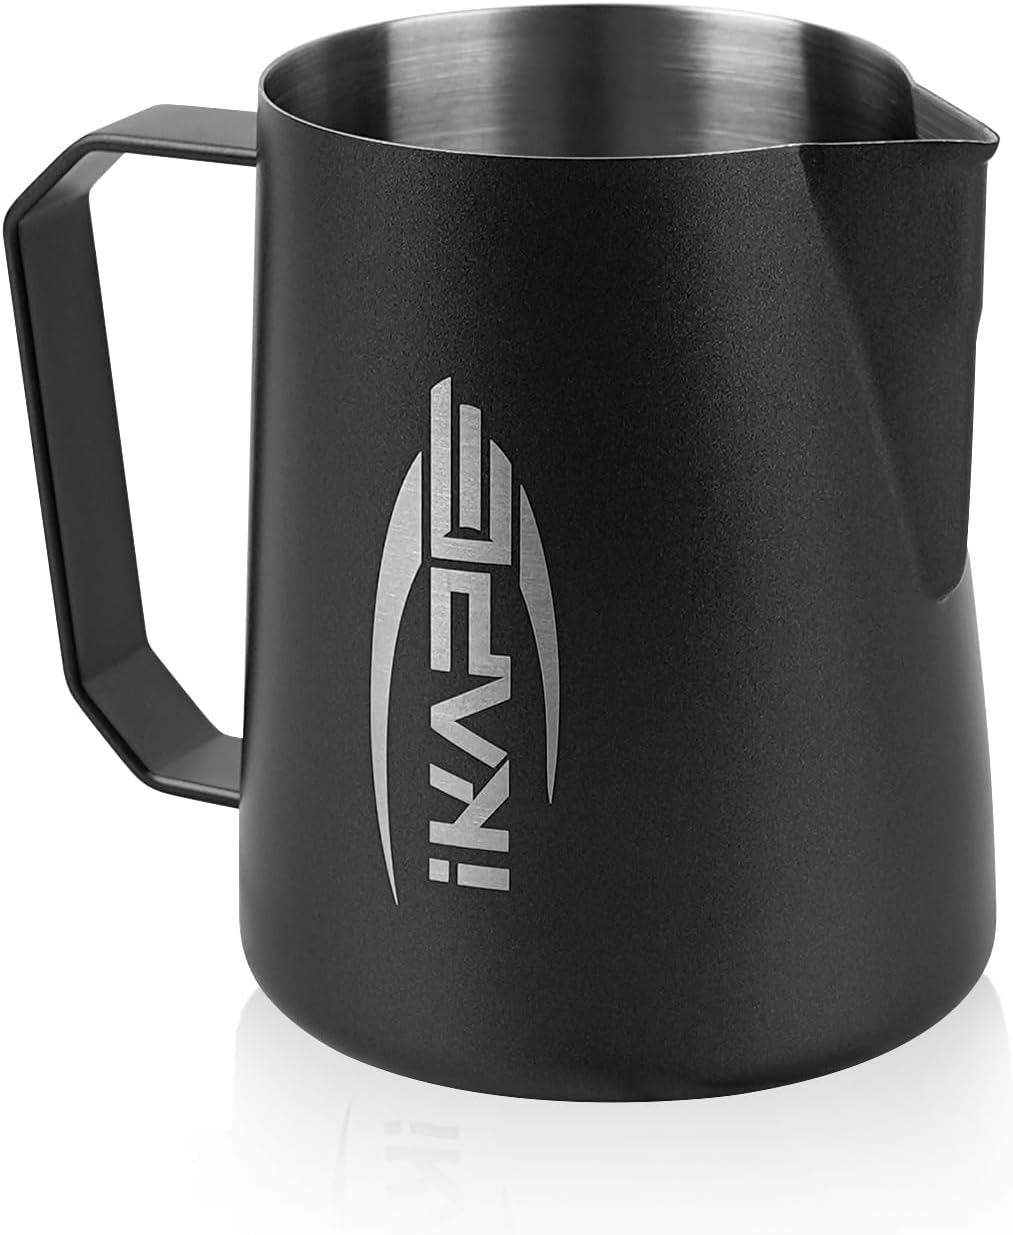 IKAPE Coffee Products, 450ml Milk Frothing Pitcher, Stainless Steel Milk Steaming Pitchers, Cappuccino Latte Art Barista Steam Pitchers Coffee Milk Frother Cups(15 oz)